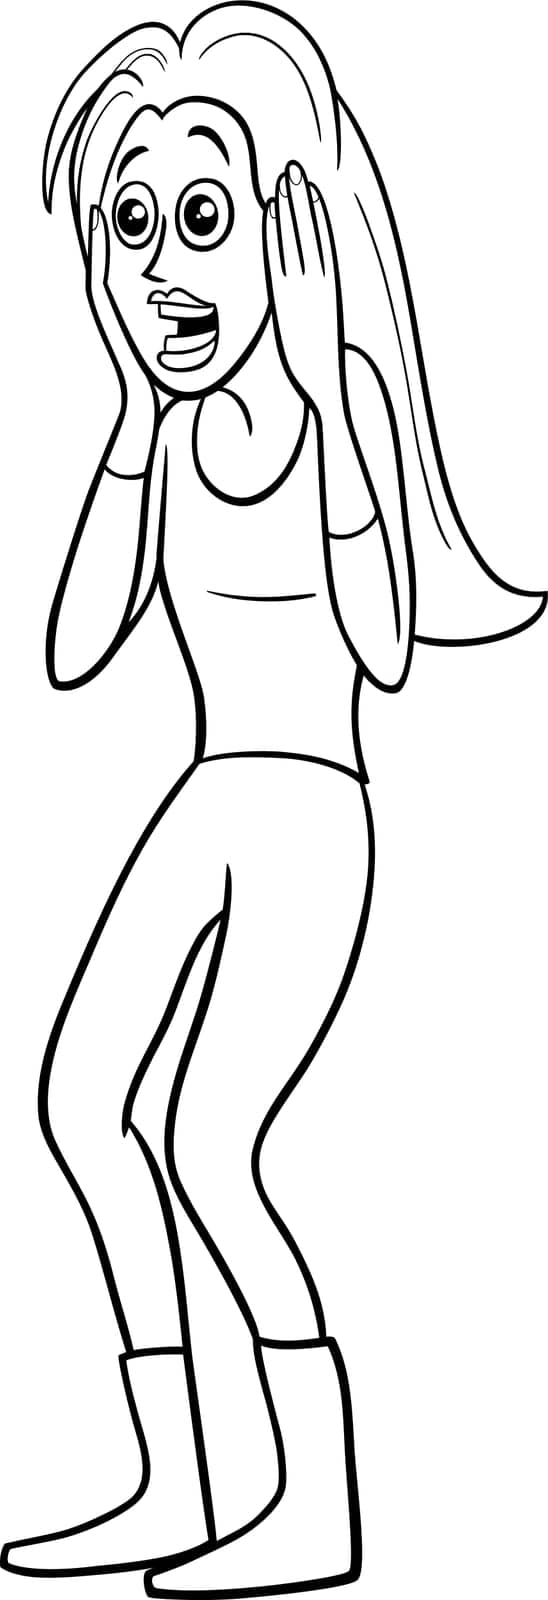 Cartoon illustration of surprised girl or young woman comic character coloring page